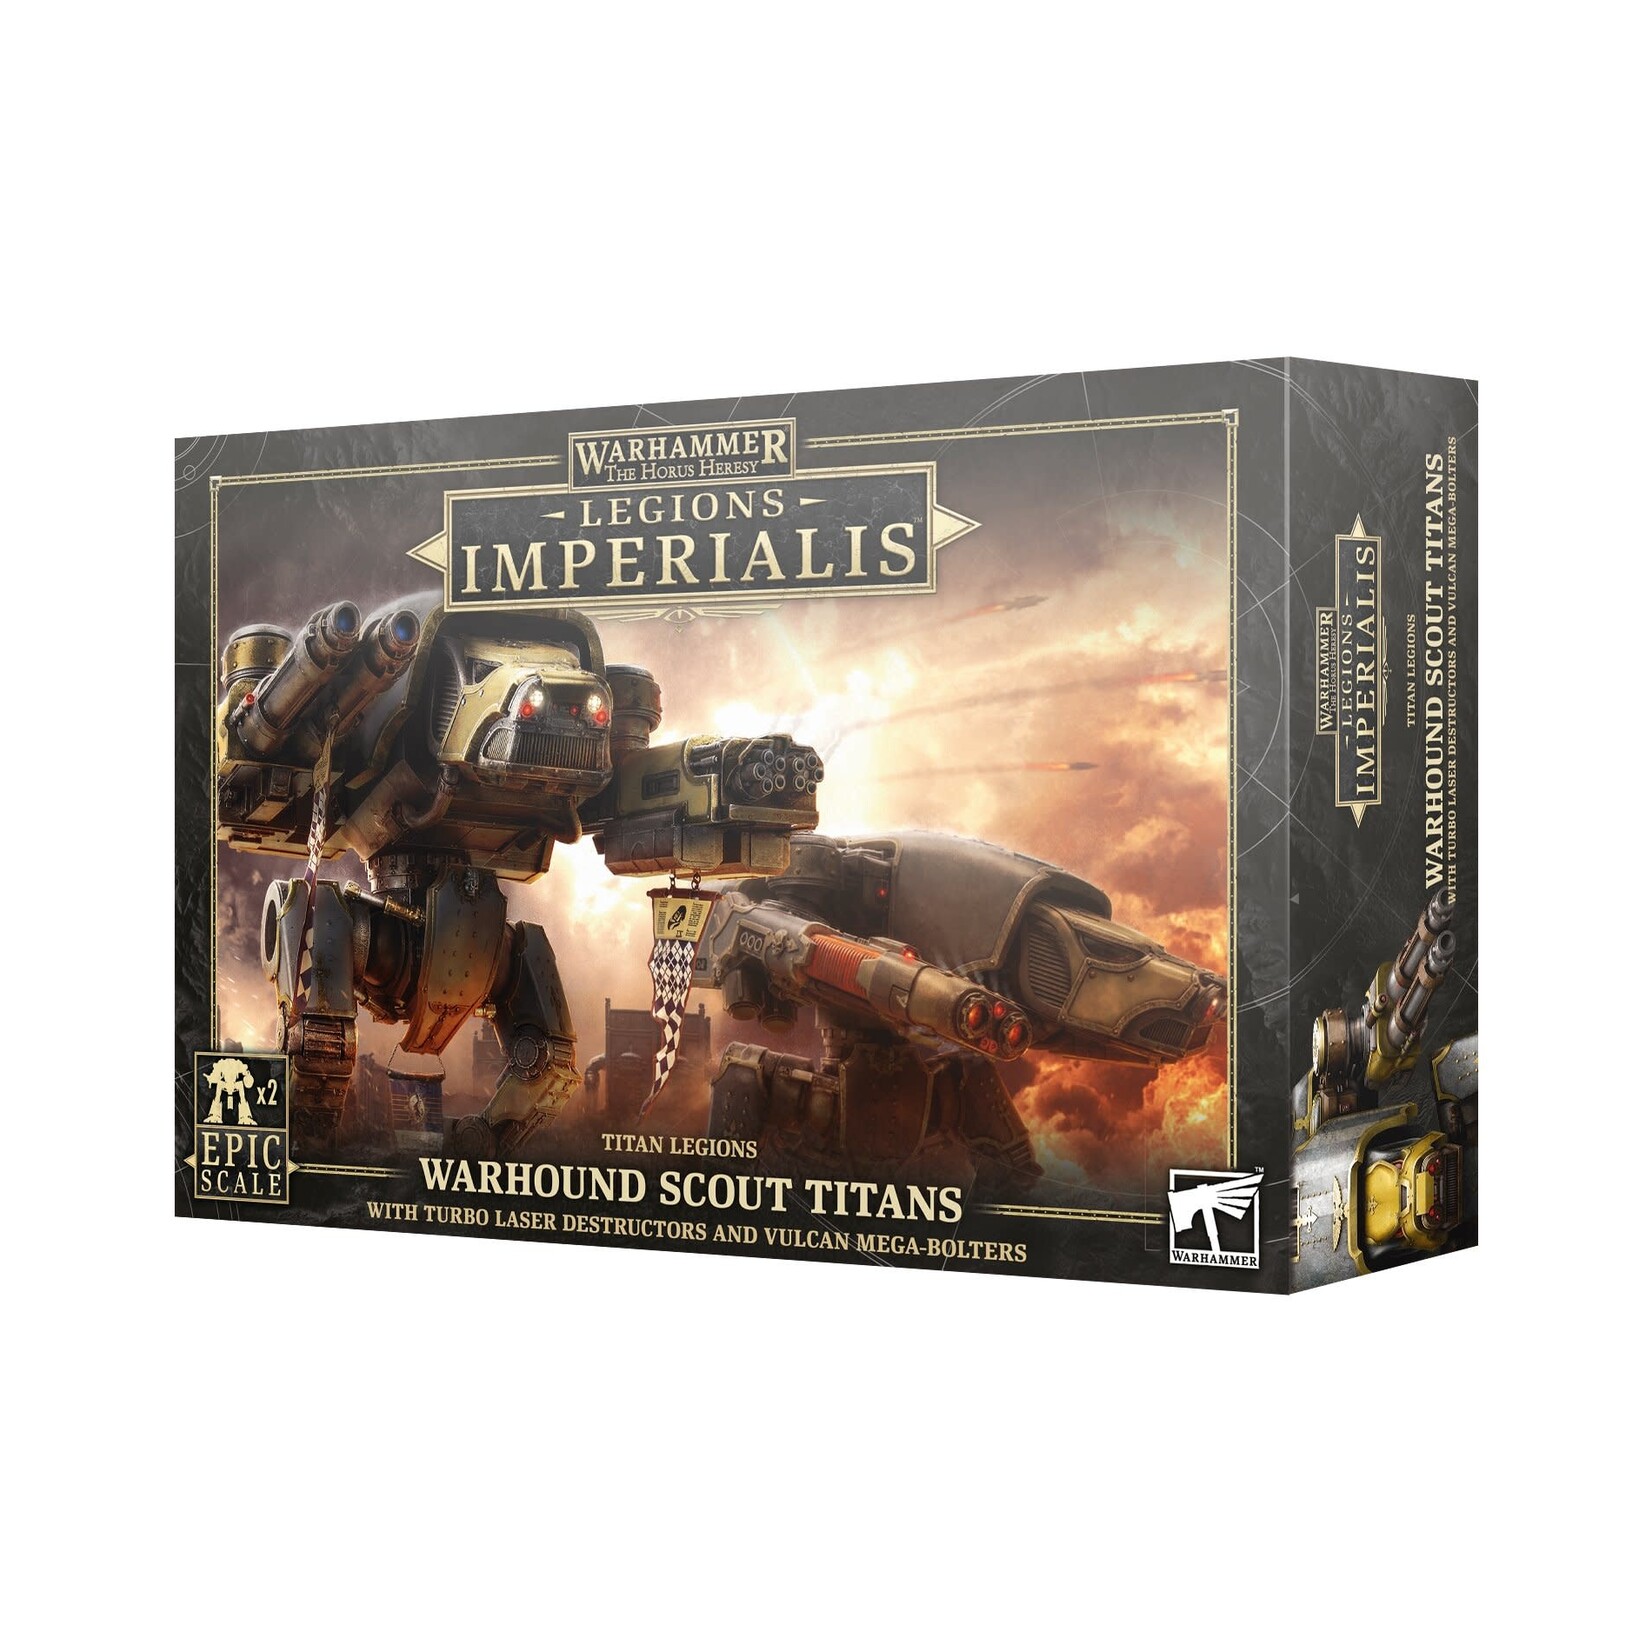 Horus Heresy Legions Imperialis: Warhound Scout Titans With Turbo Laser Destructors and Vulcan Mega-Bolters ( Epic )